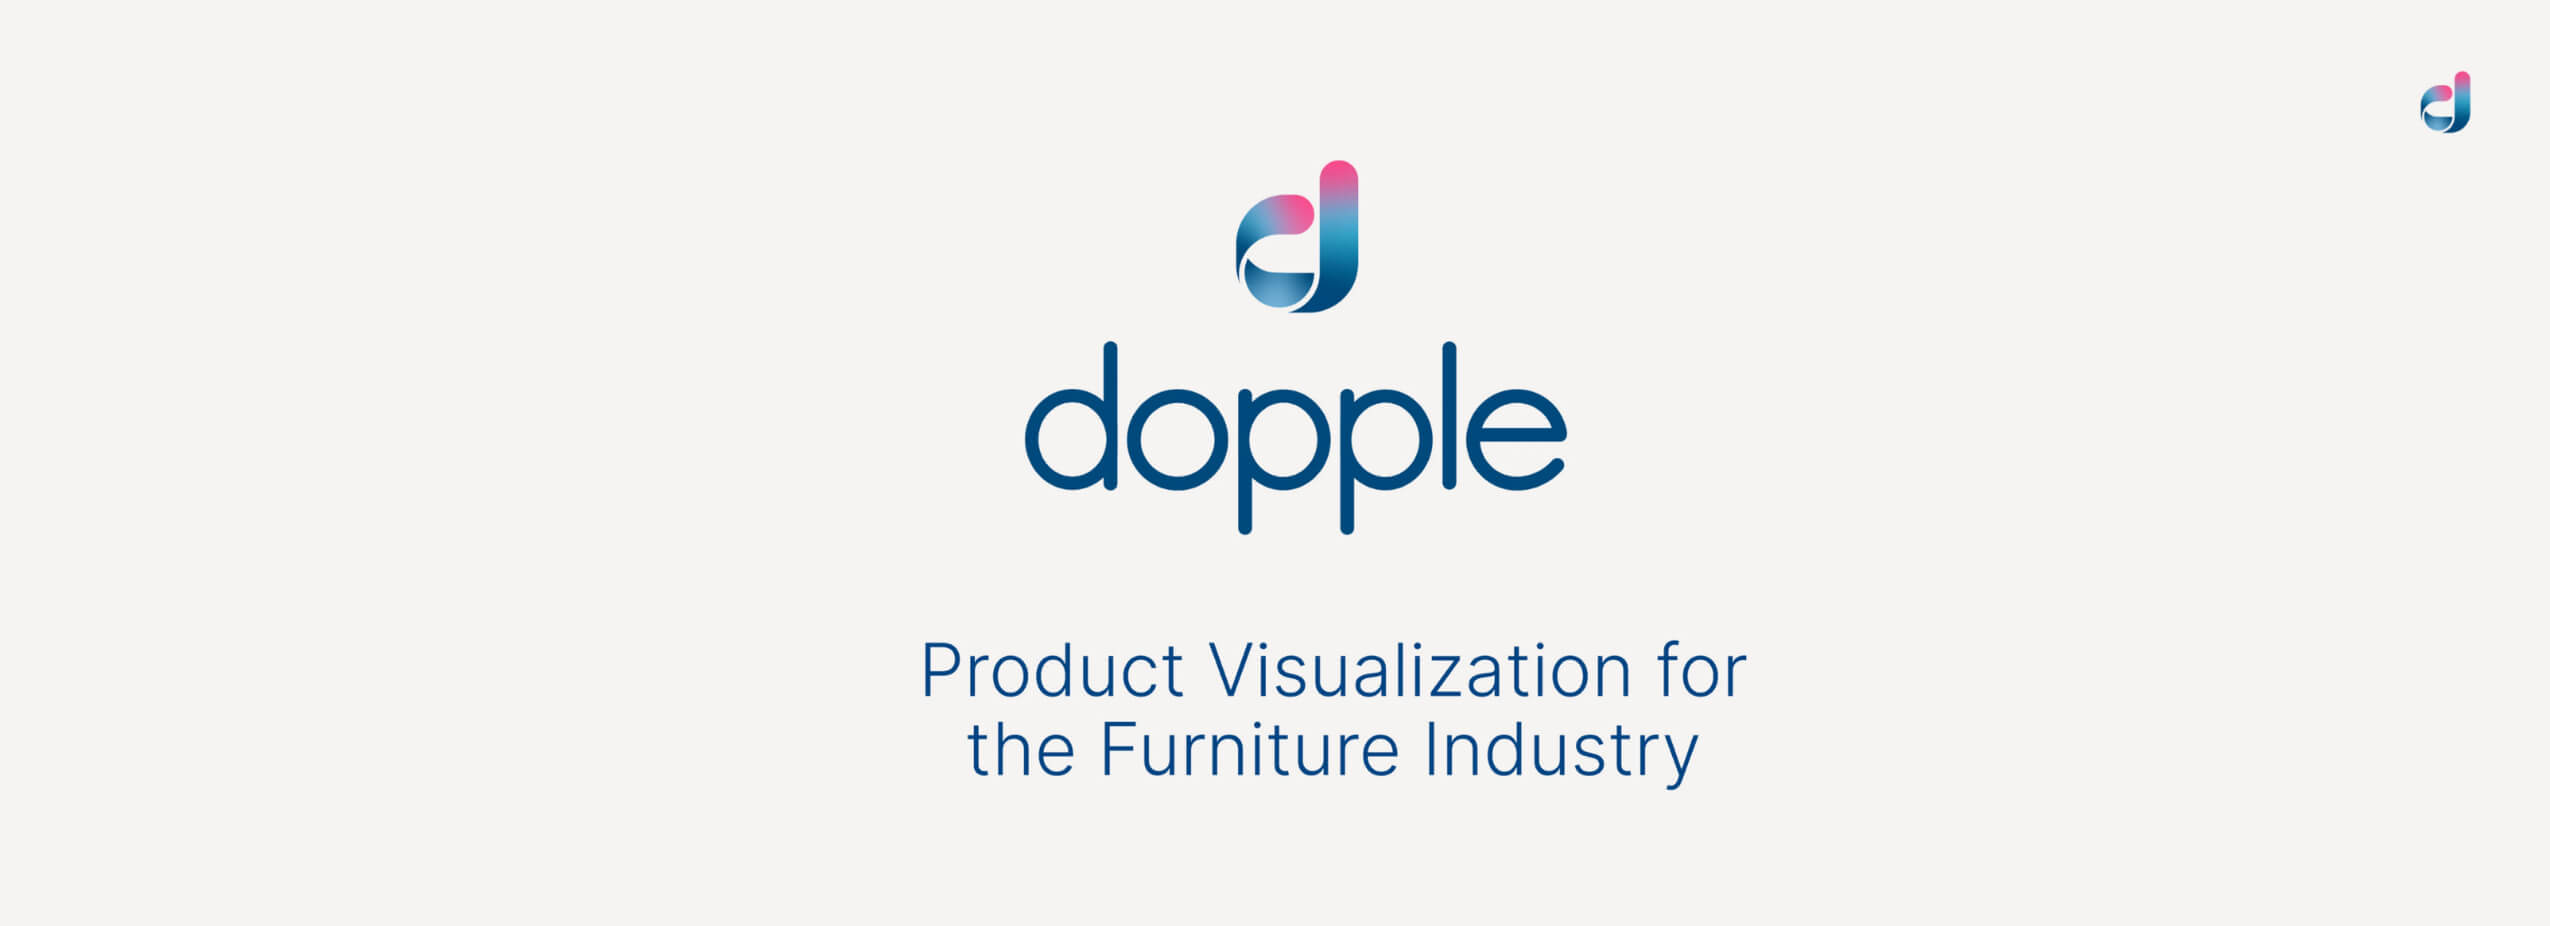 Dopple-Blog-Case-Study-Product-Visualization-for-the-Furniture-Industry-Images-3-NEW